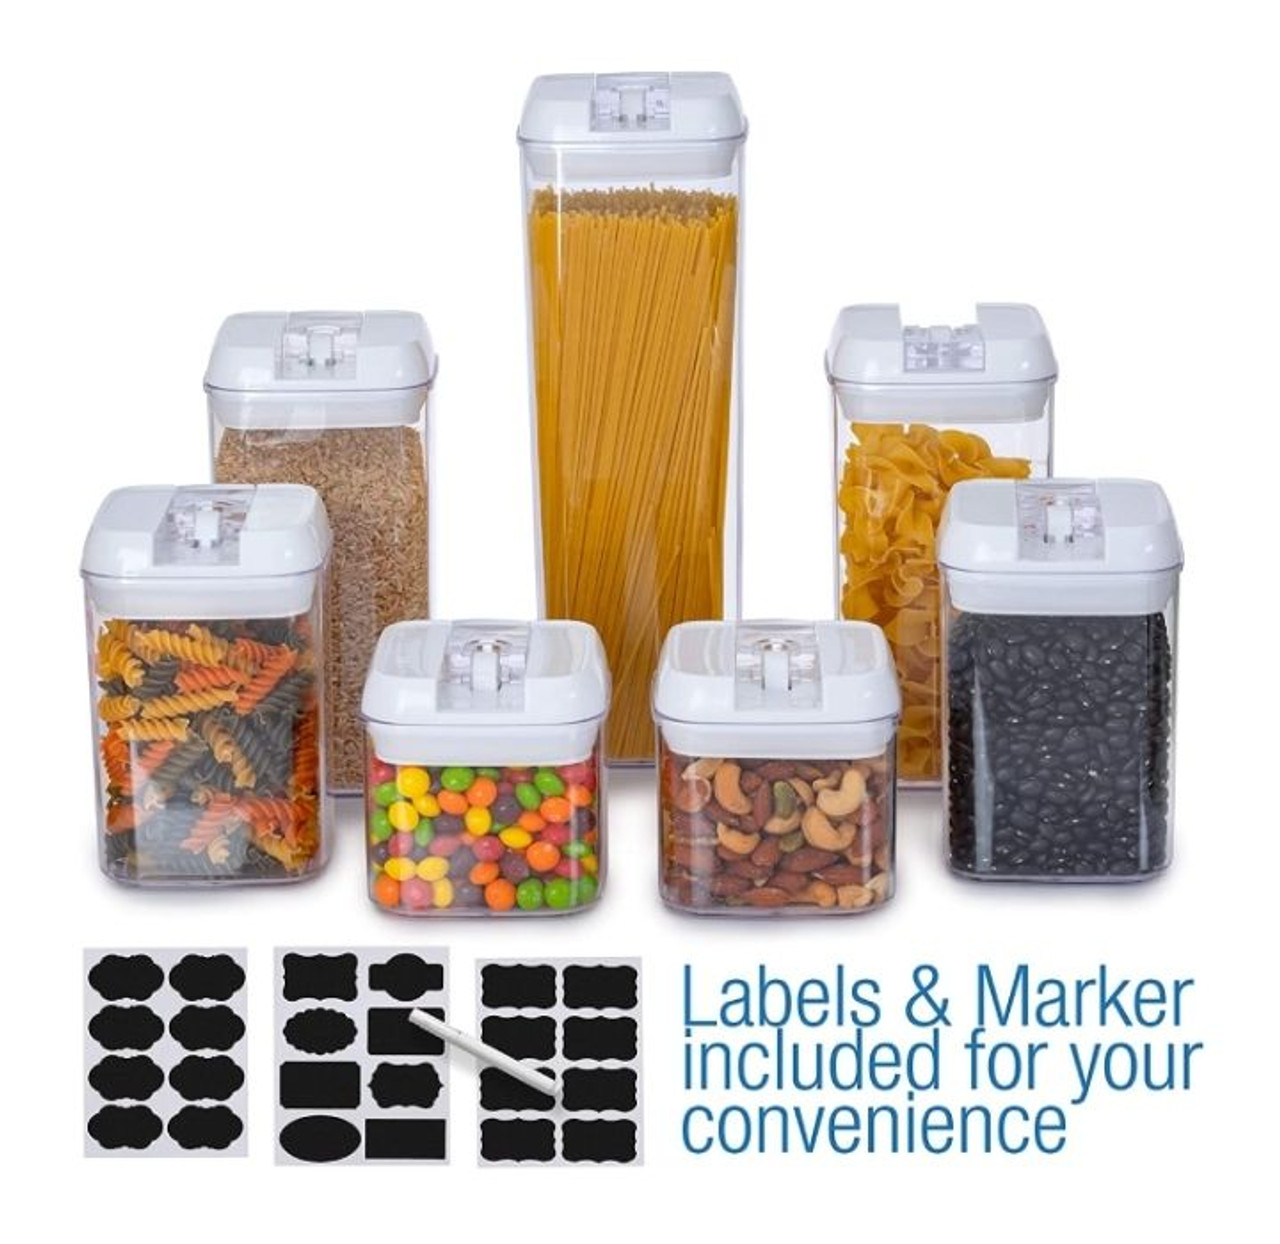 7-Piece Airtight Food Storage Container Set product image